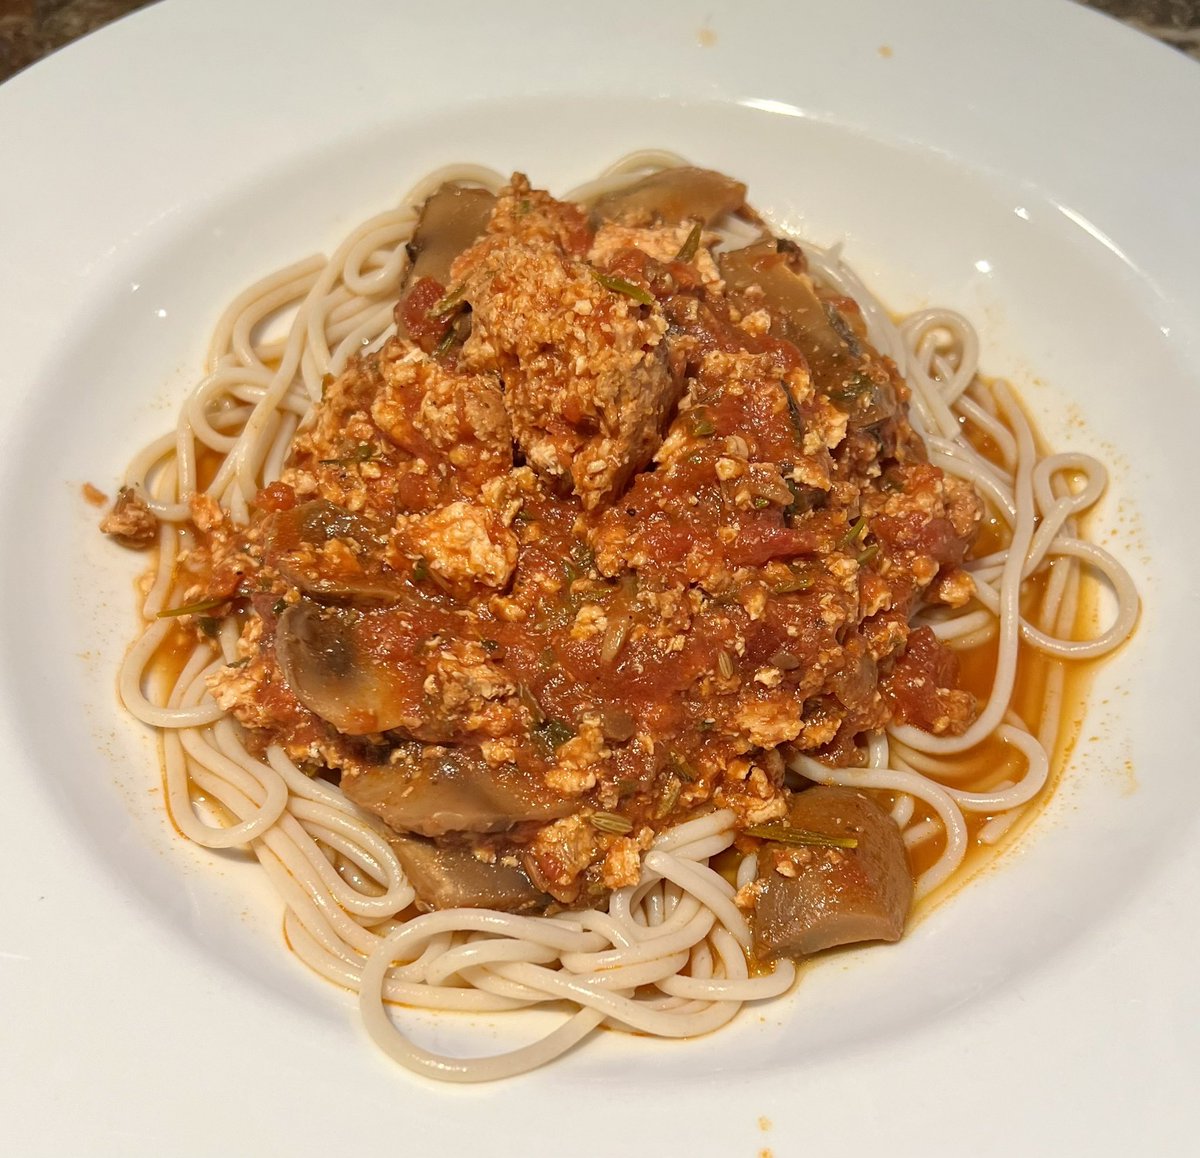 Feeling incredibly 🙏🏼🙂🥰 blessed today! 🌟 Gabrielle whipped up this amazing homemade chicken spaghetti 🍝 with gluten-free pasta just for me. It’s perfectly organized on the plate, making every bite as delicious as it looks! Truly, it’s the little things like this that warm ❤️